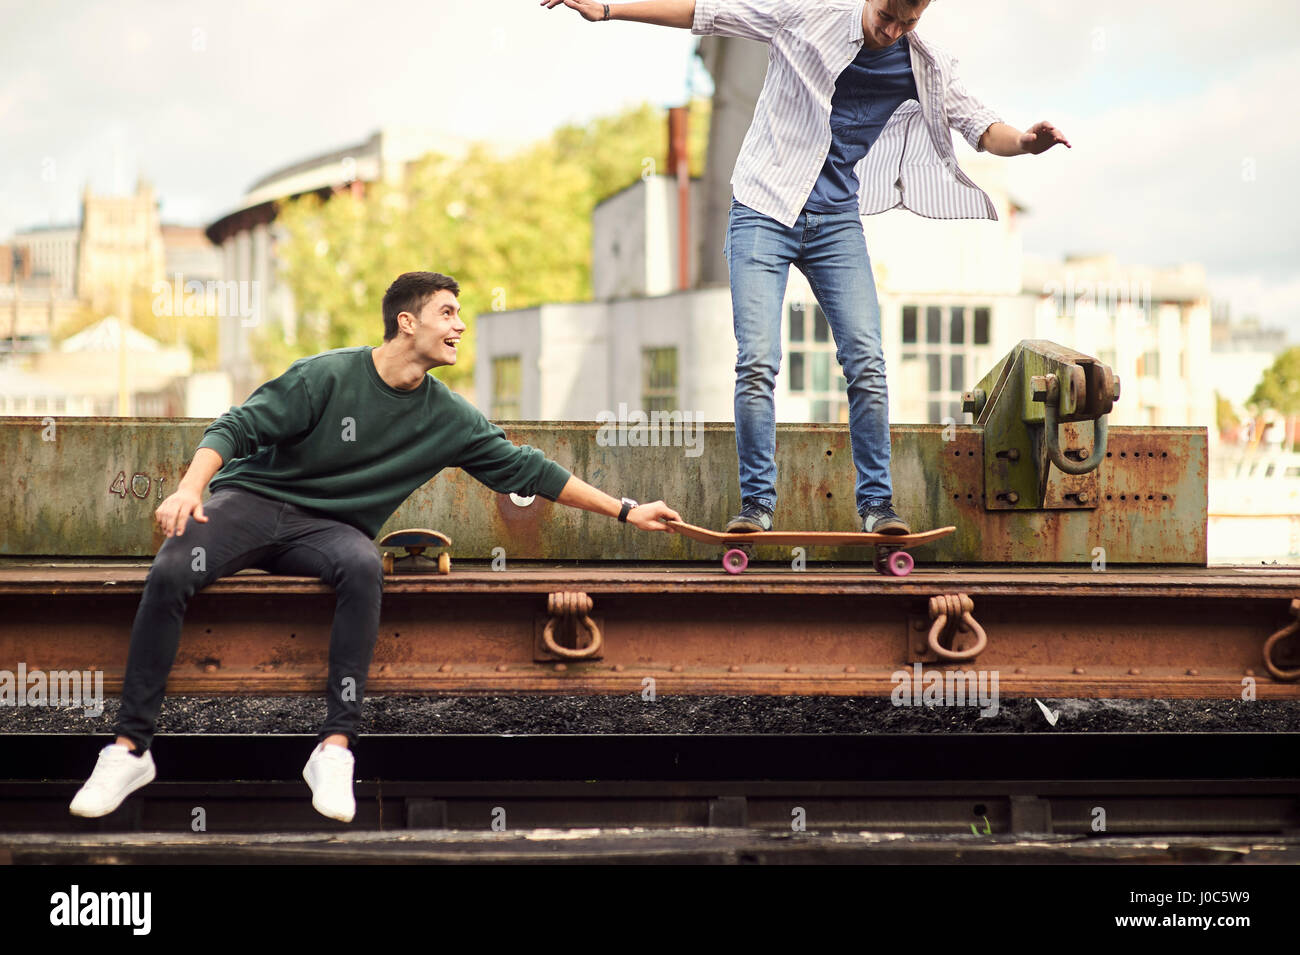 Two young men fooling around by train track, balancing on skateboard Bristol, UK Stock Photo